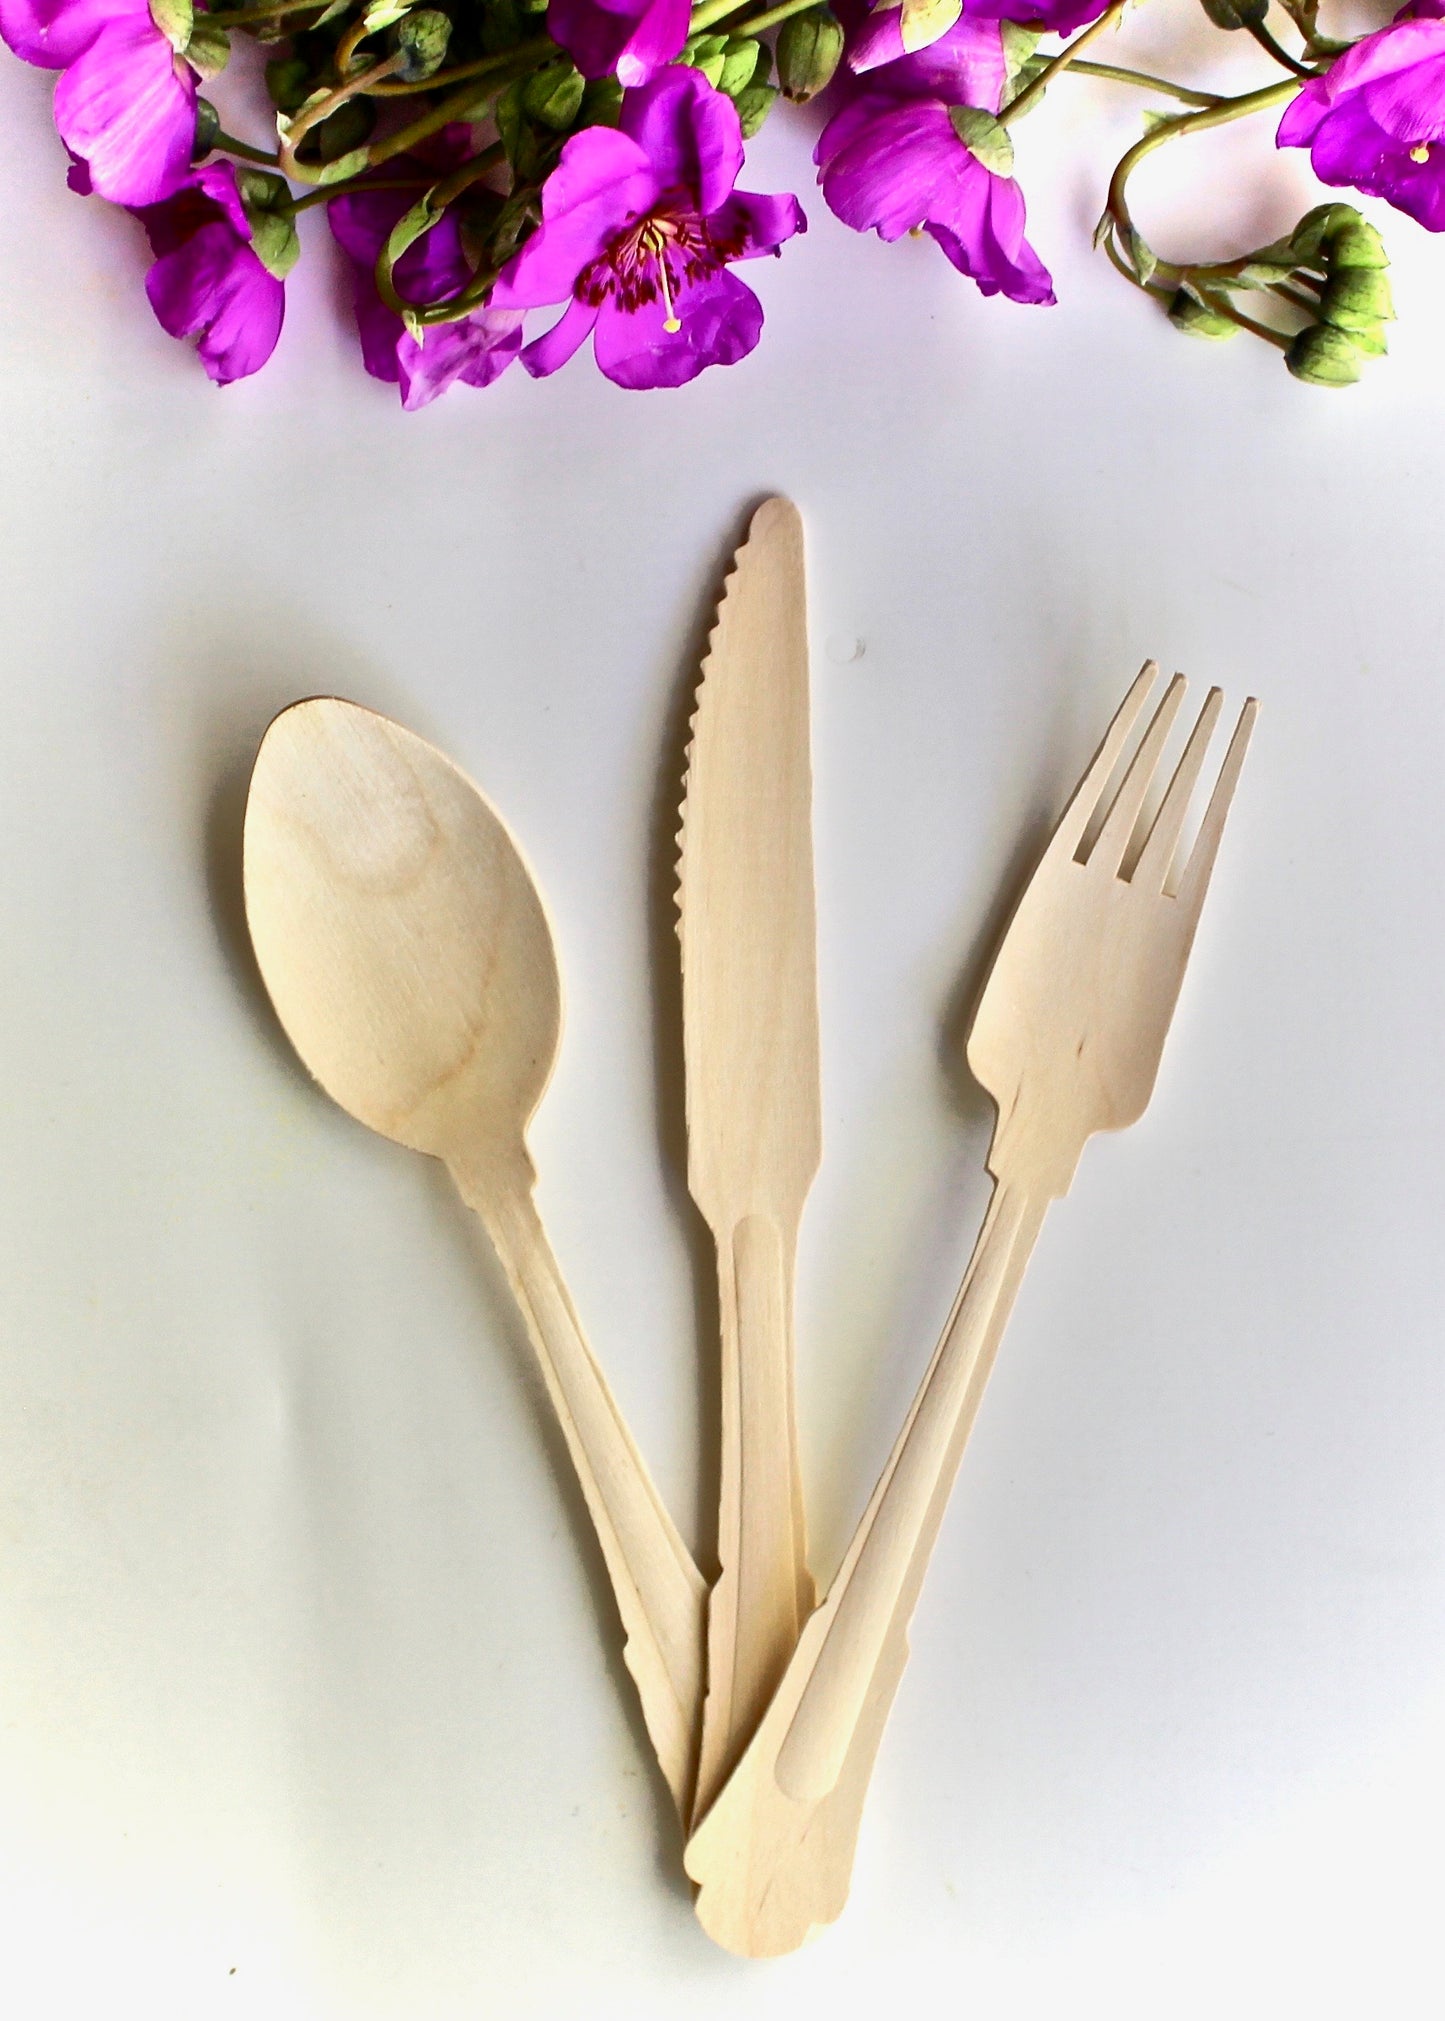 Disposable 25 Pic each Fork - Knife - Spoon - wooden Birch Utensils